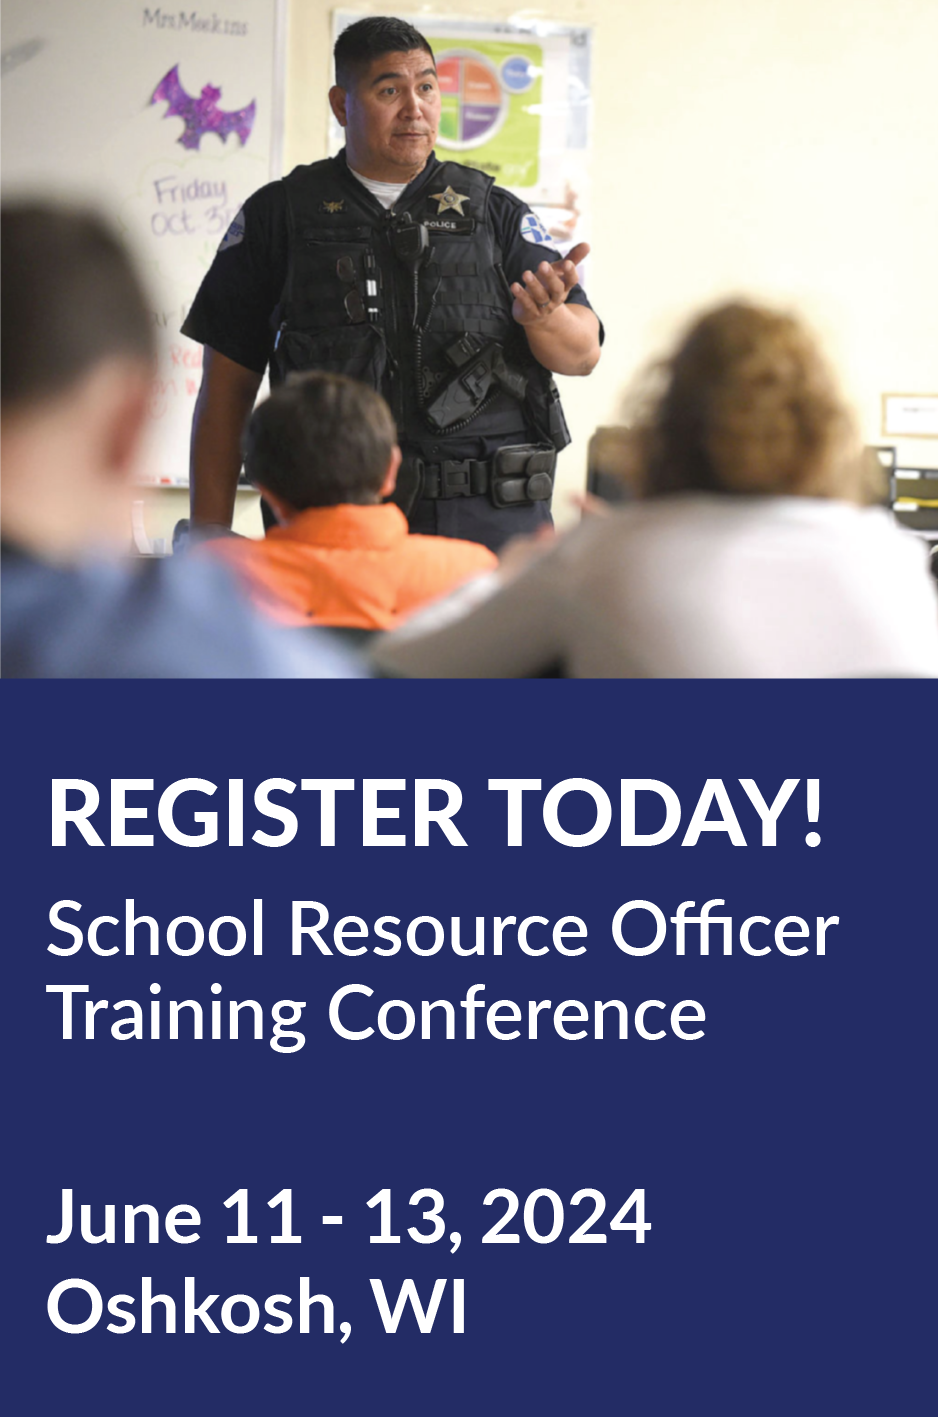 School Resource Officer Training Conference